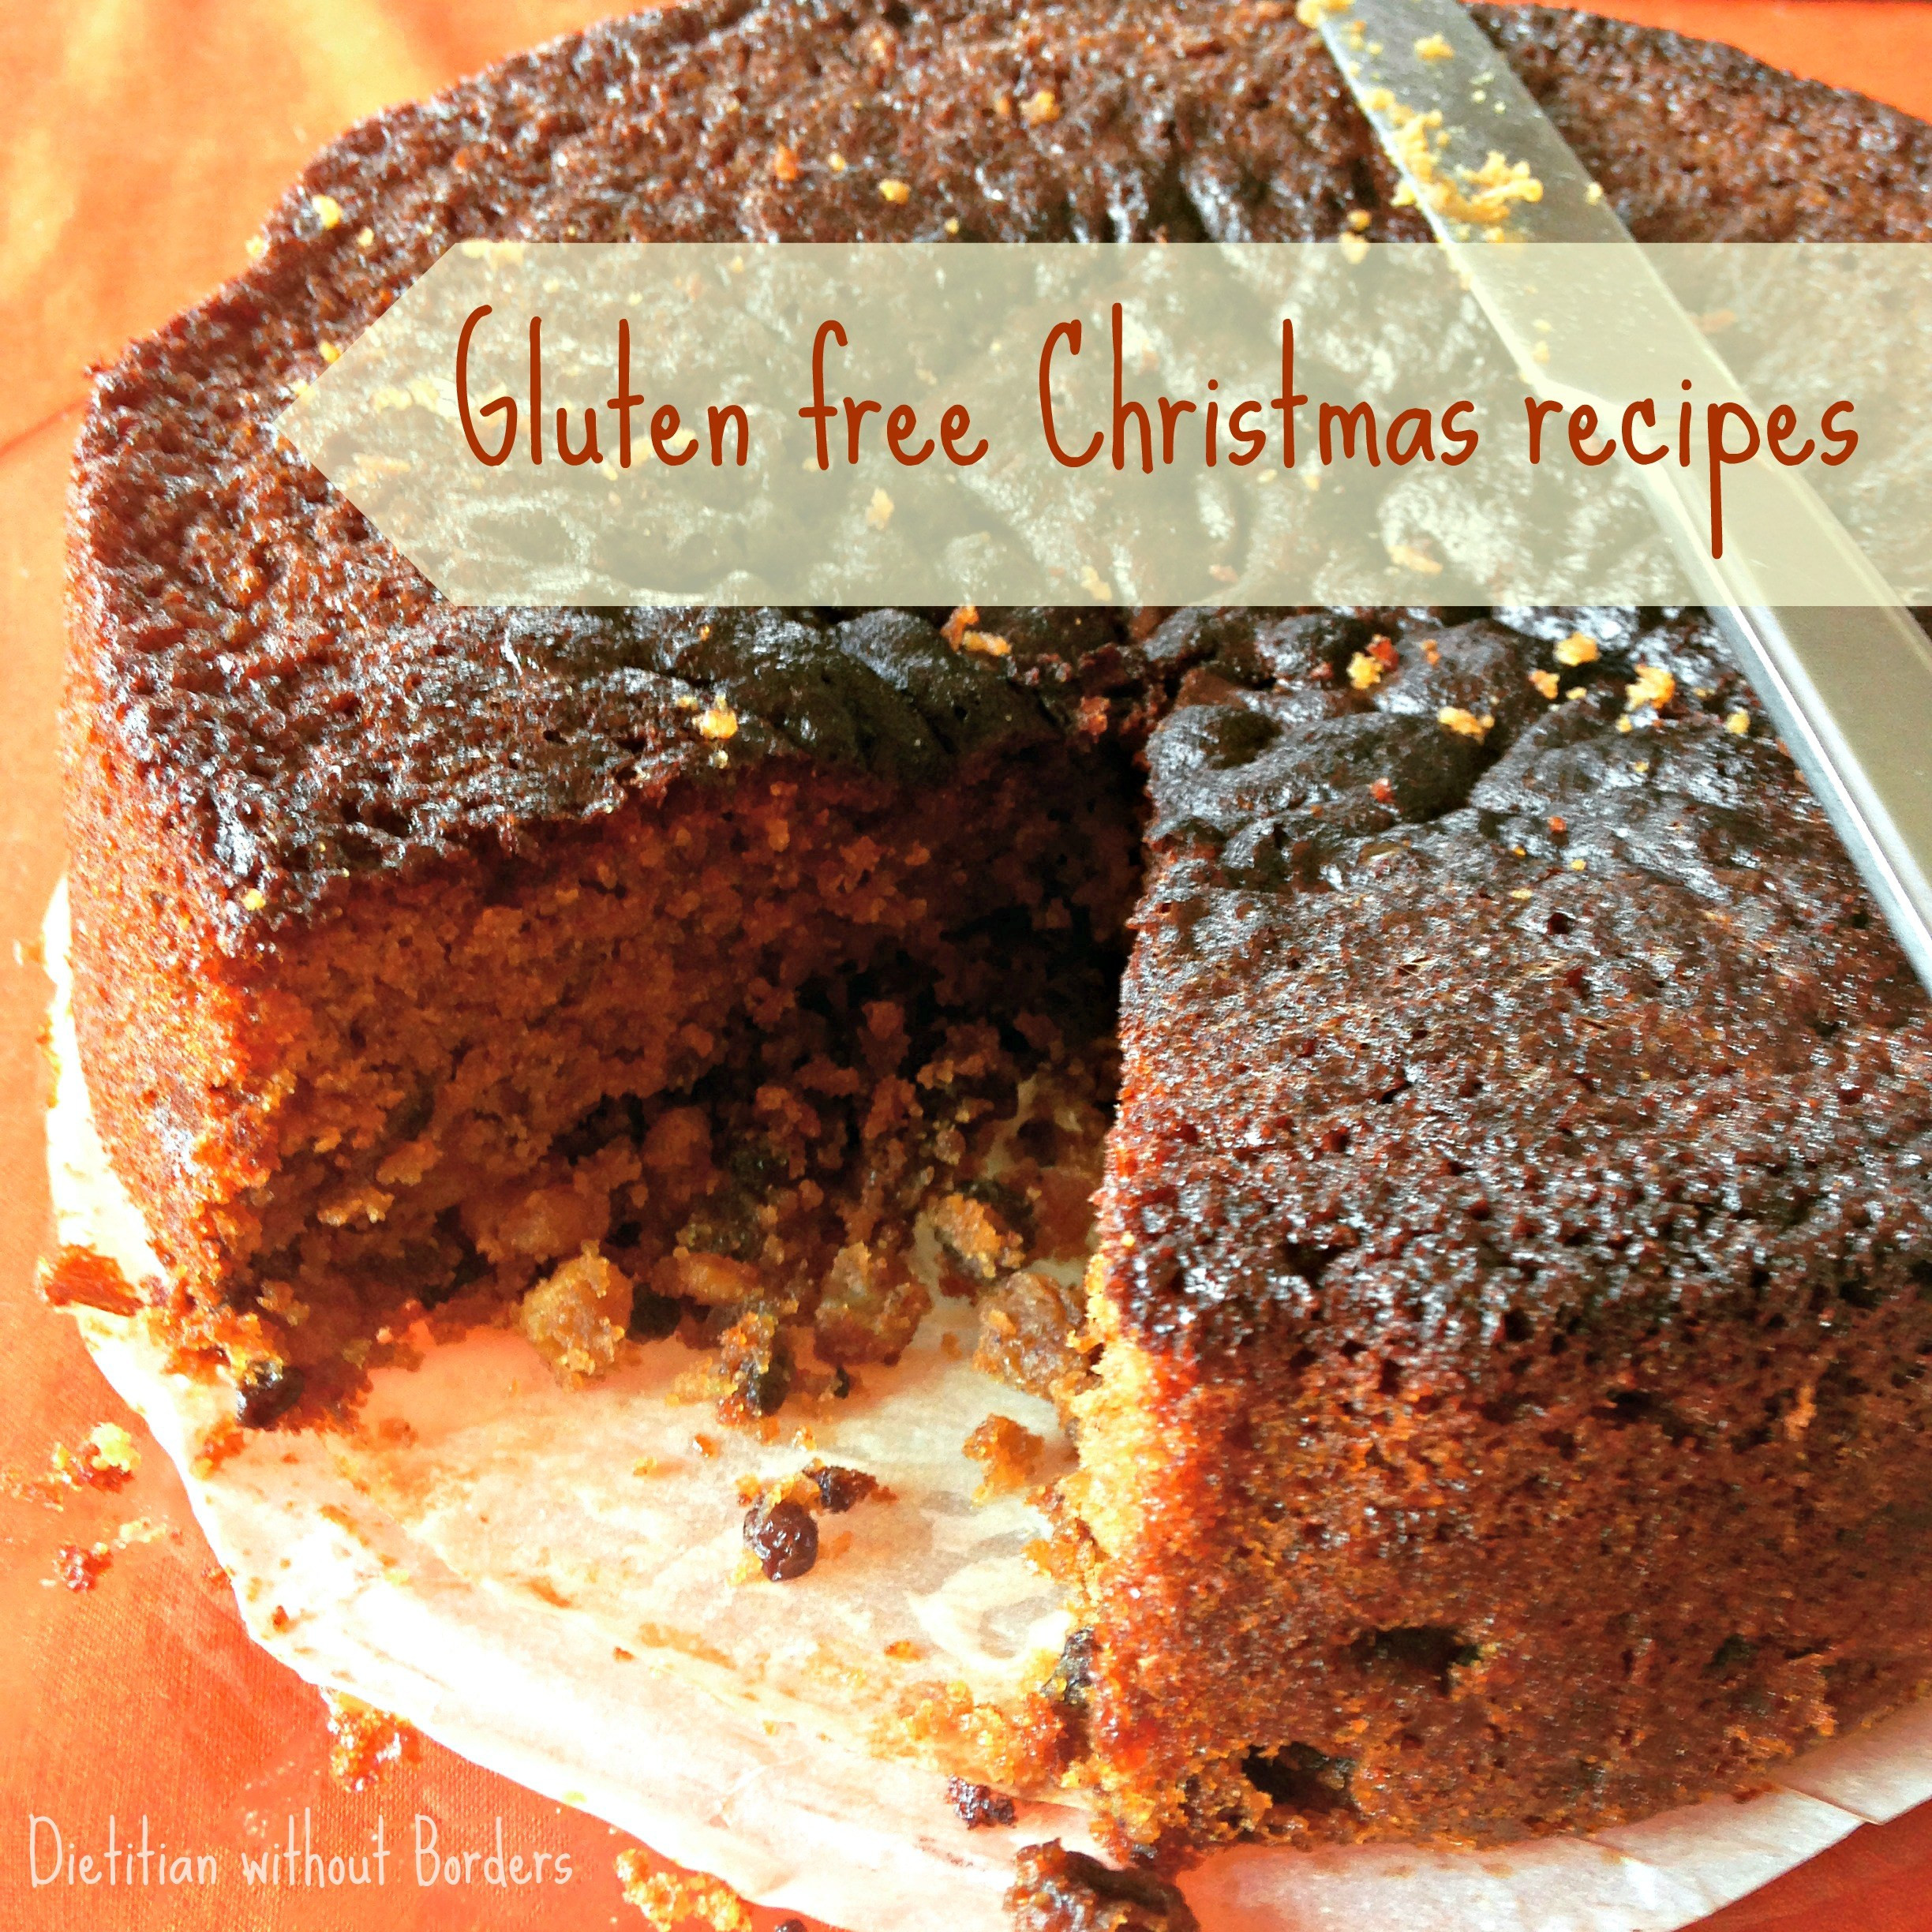 Gluten Free Christmas Recipes
 Gluten free Christmas recipes Dietitian without Borders